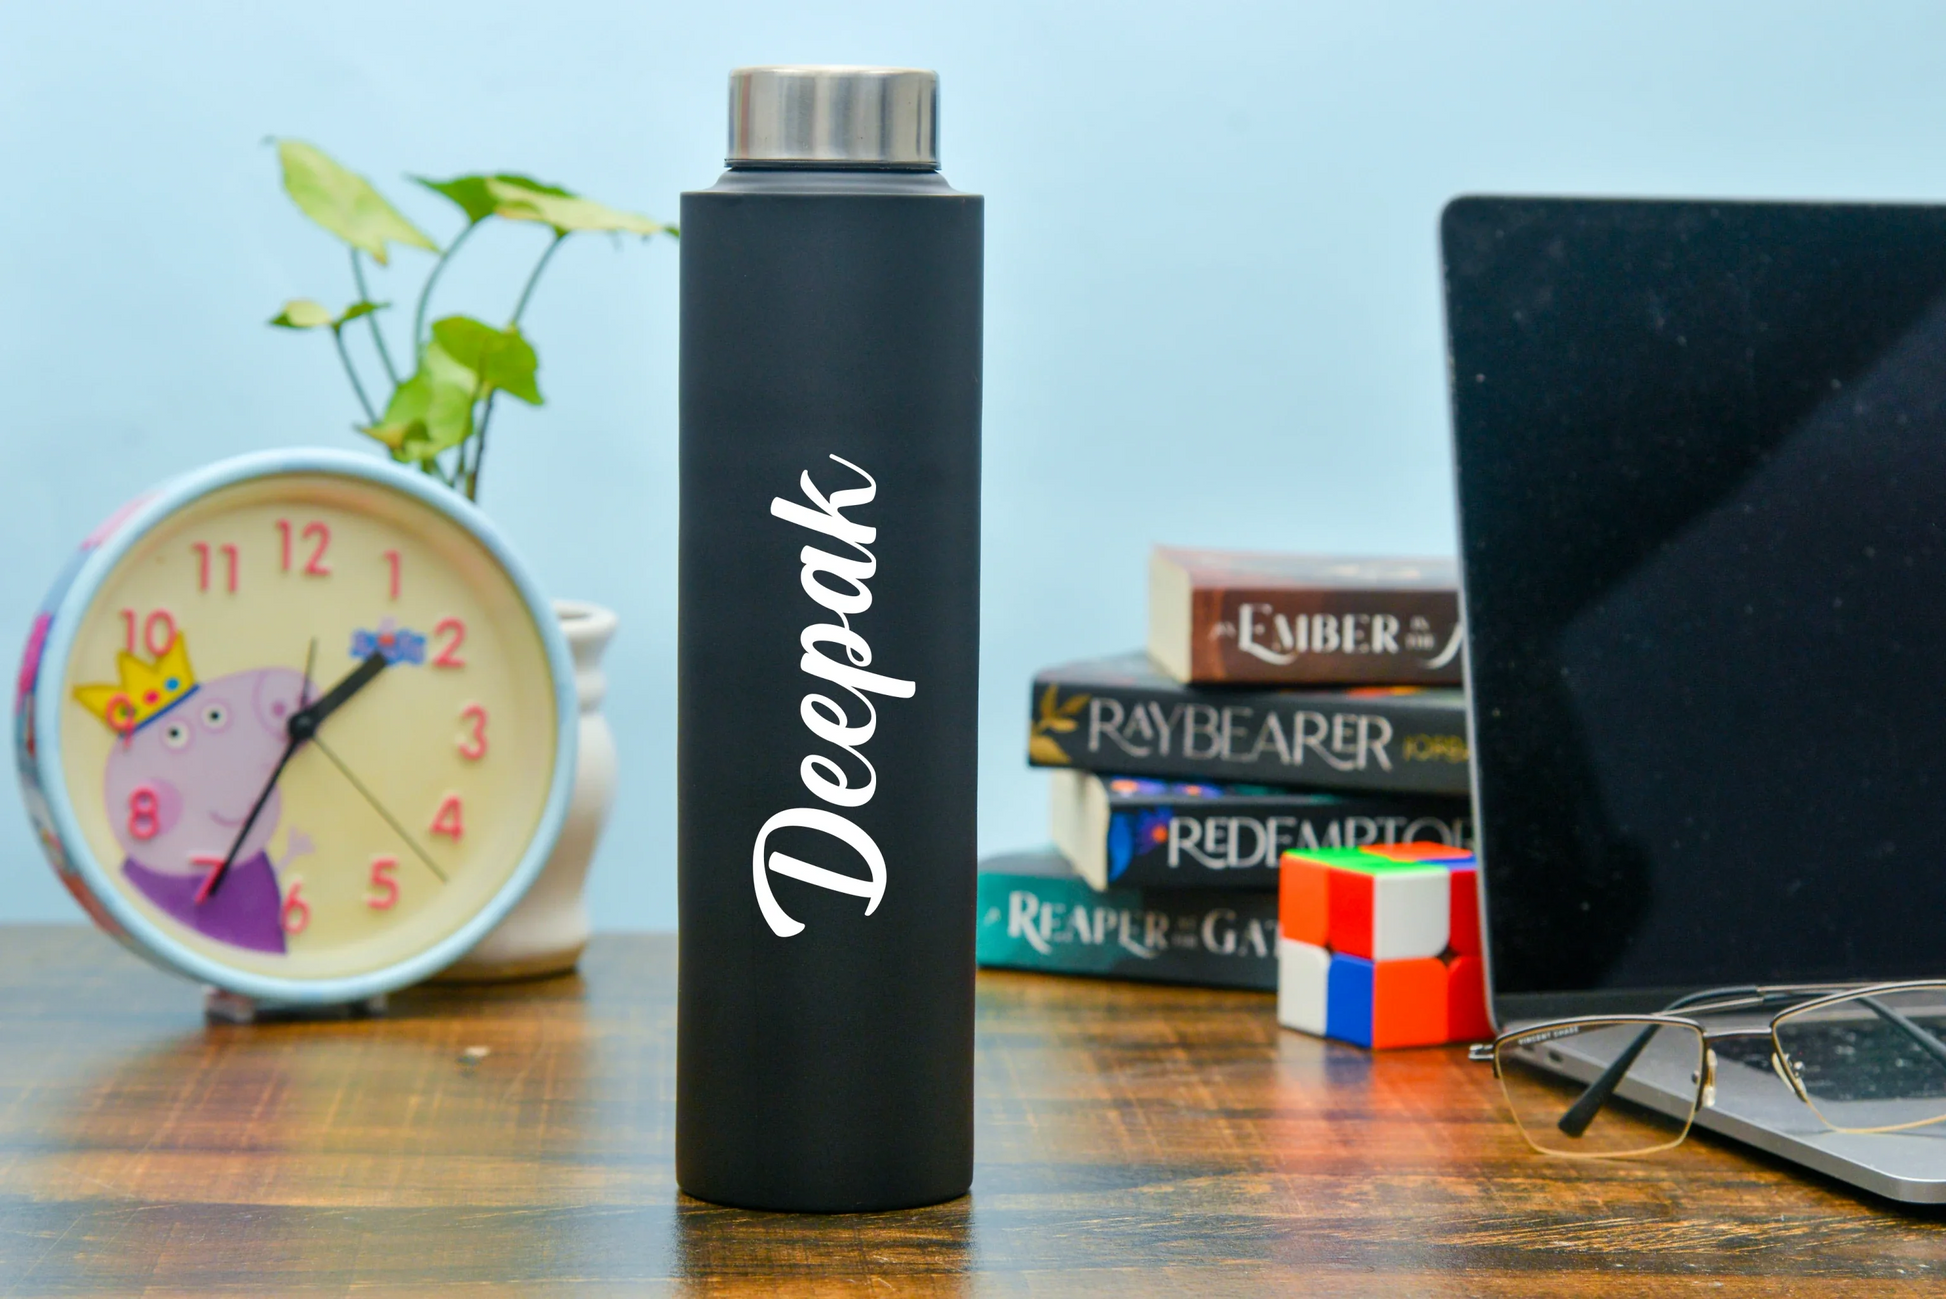 Our thermos bottle is crafted with a unique and modern design. Gone are the days of old and boring flasks. Guaranteed to impress your colleagues, friends & family